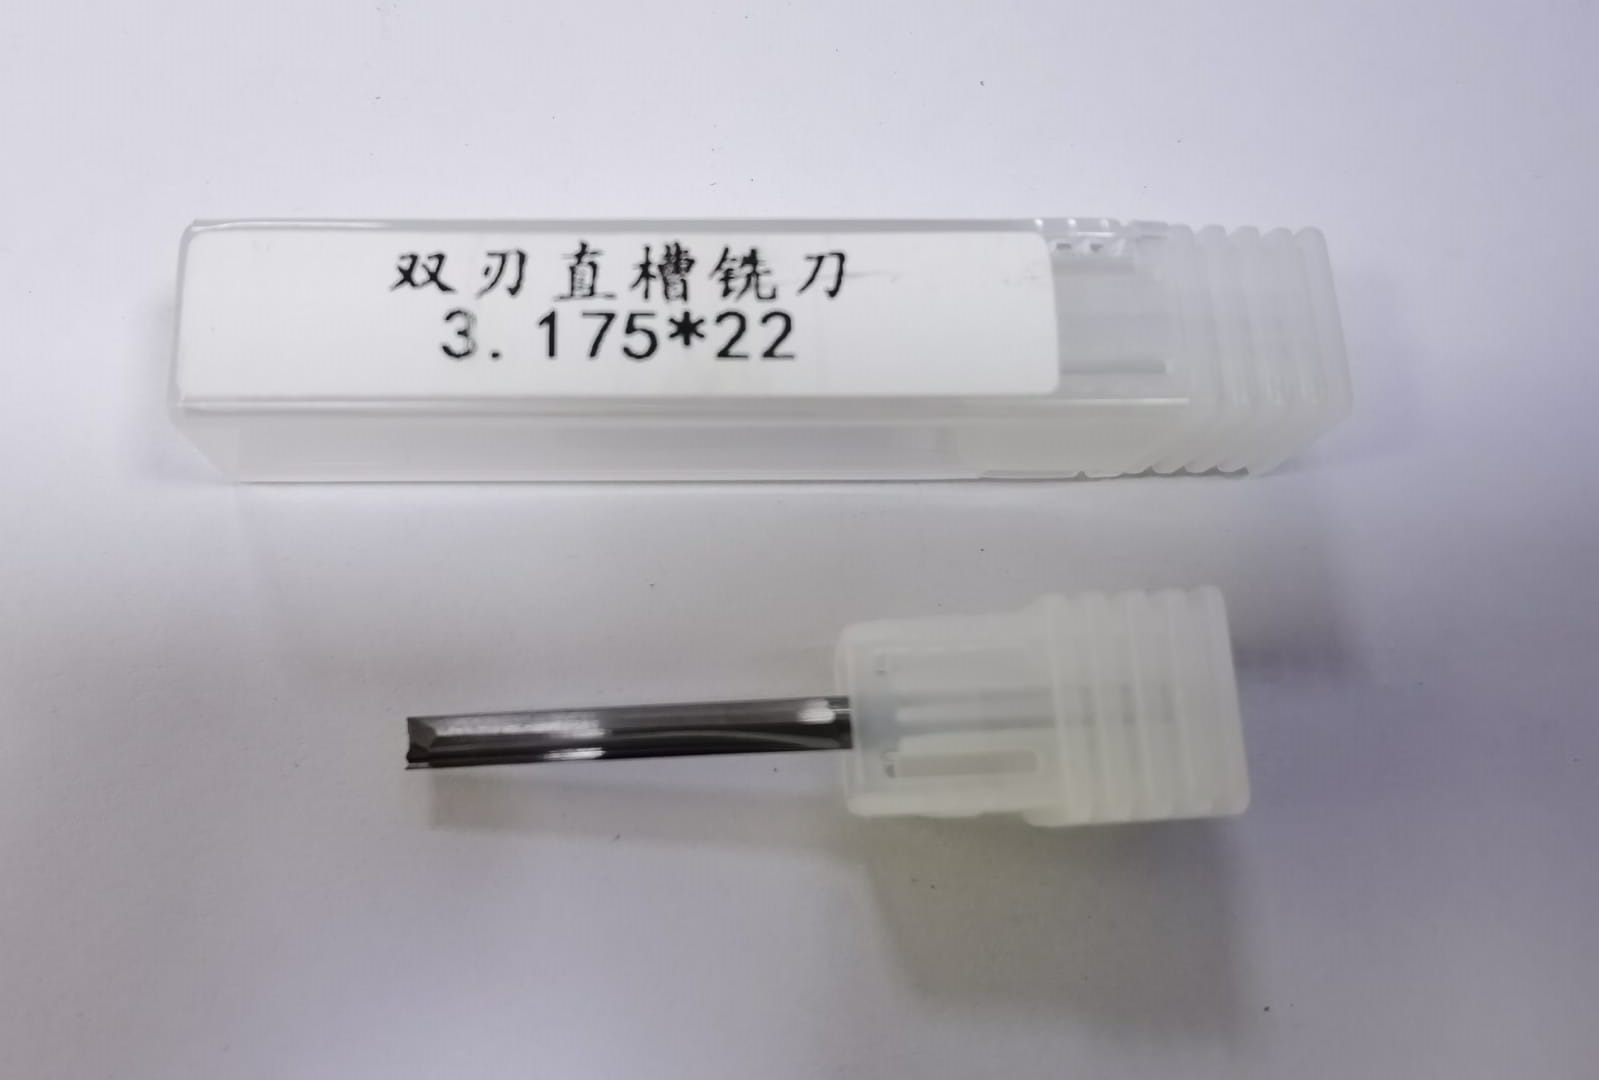 Personlized Products Vacuum Coating Machine -
  Double edged straight flute milling bit 3.175*22 – Godn